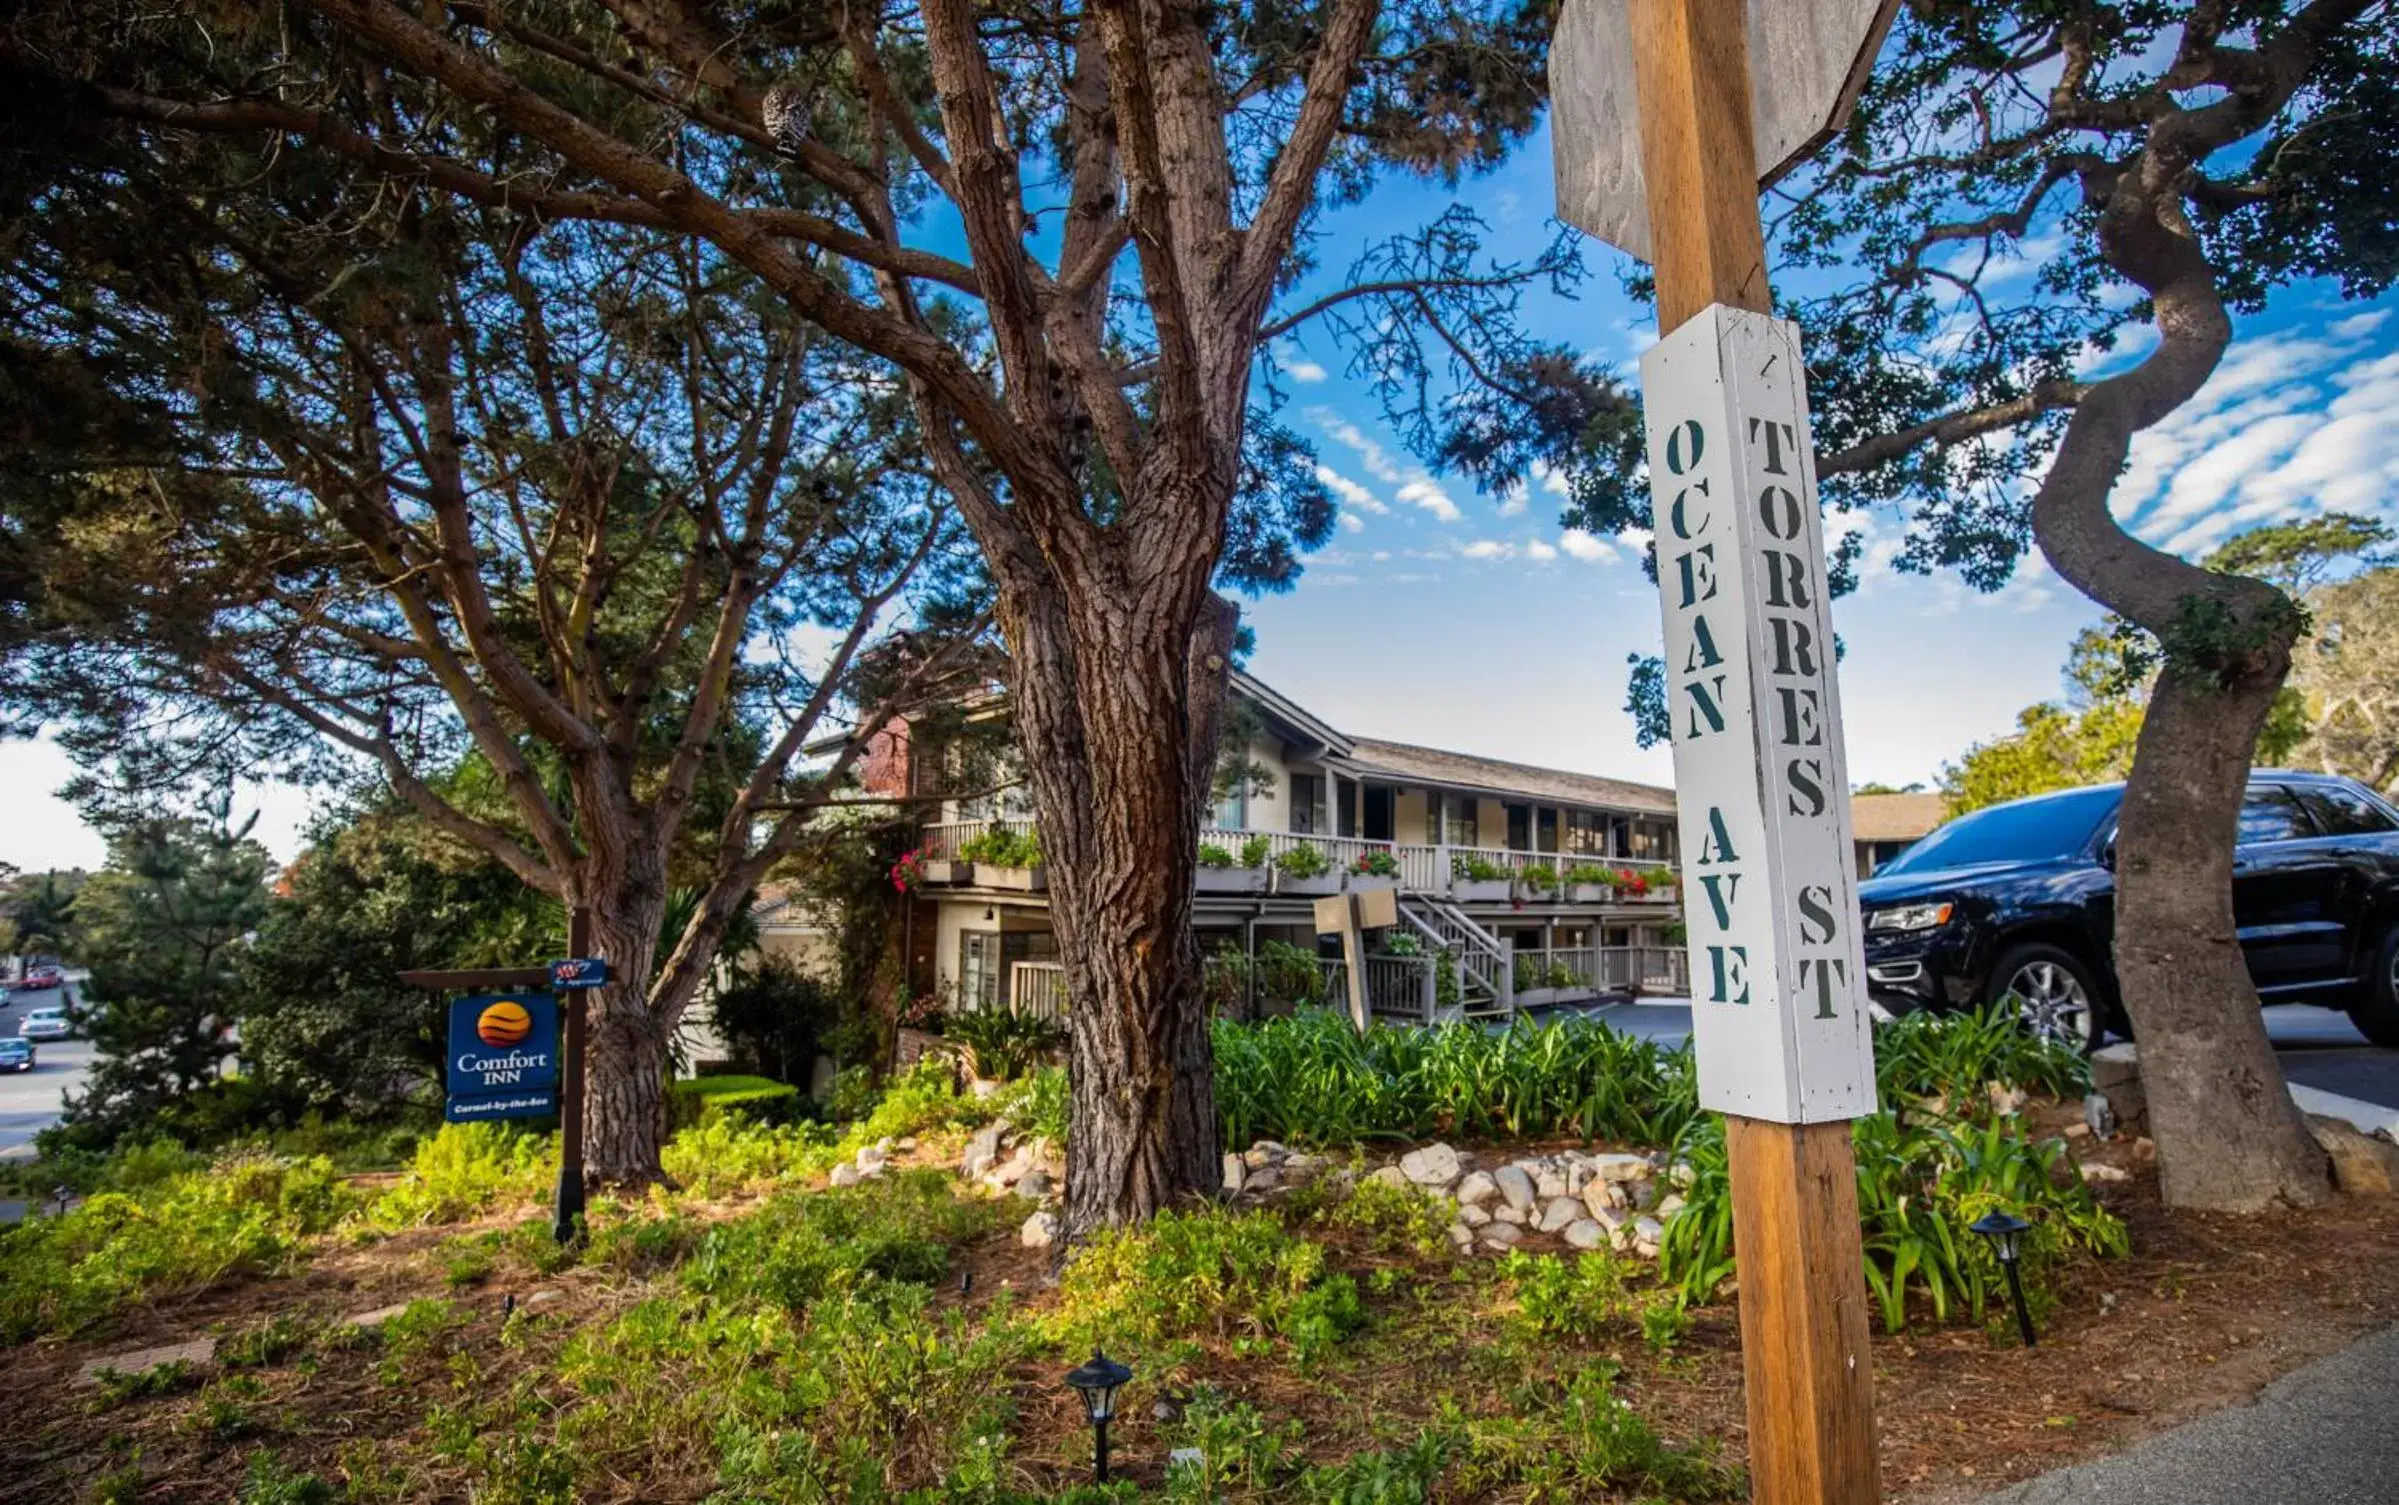 Property Building in Comfort Inn Carmel By the Sea